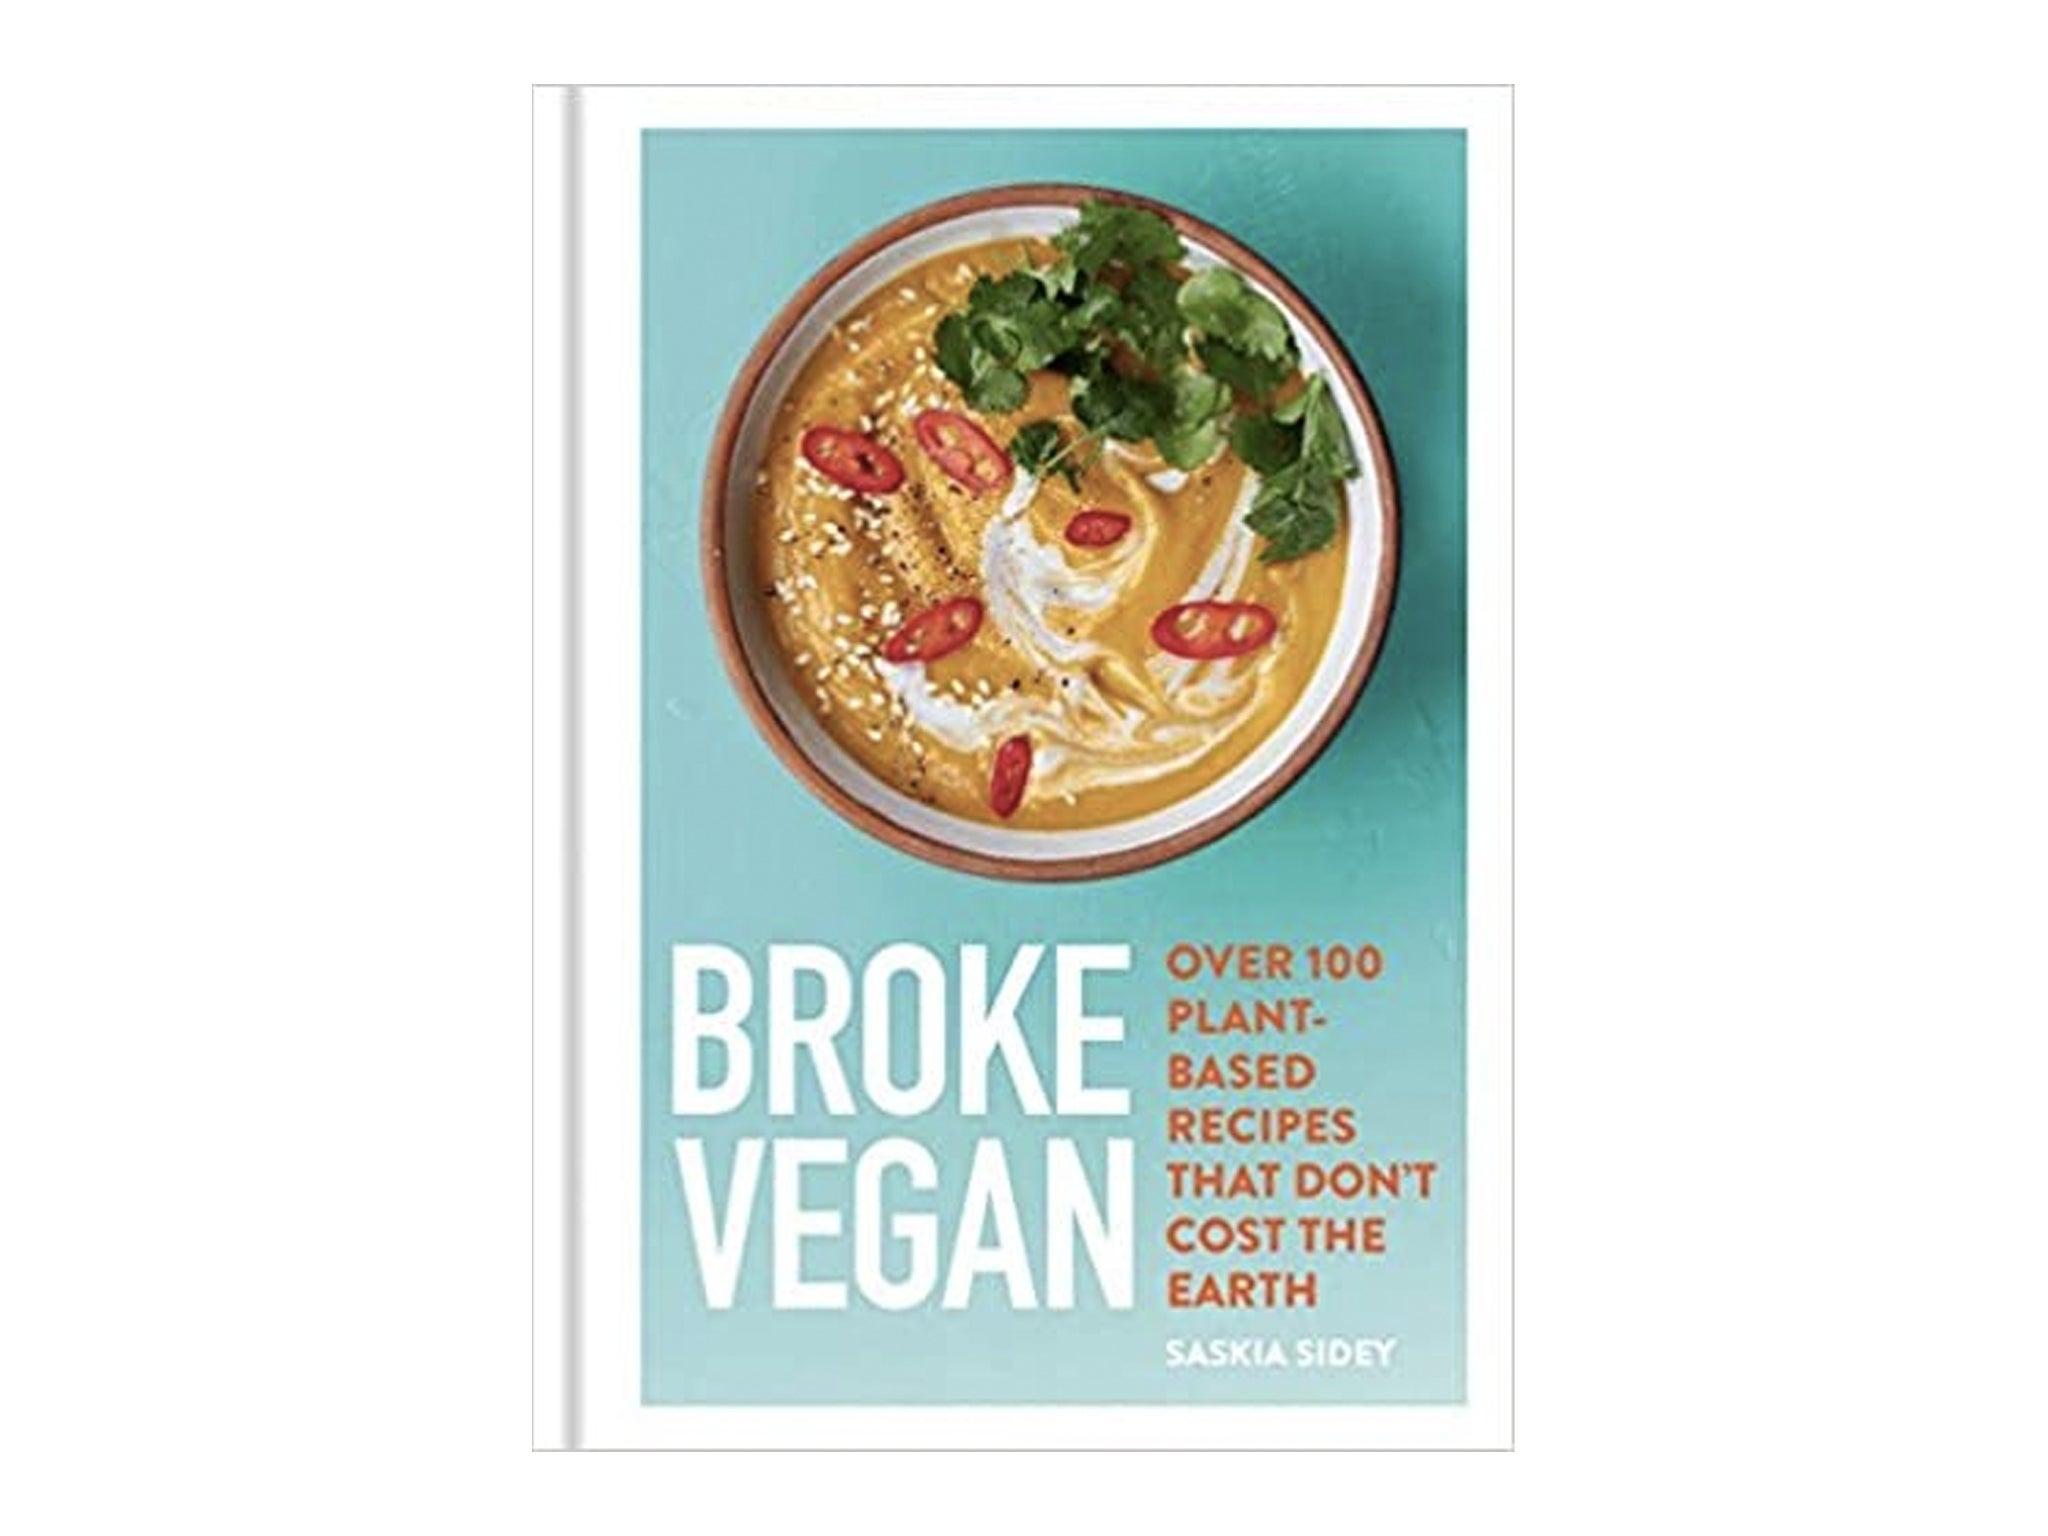 ‘Broke Vegan: Over 100 plant-based recipes that don't cost the earth’ by Saskia Sidey